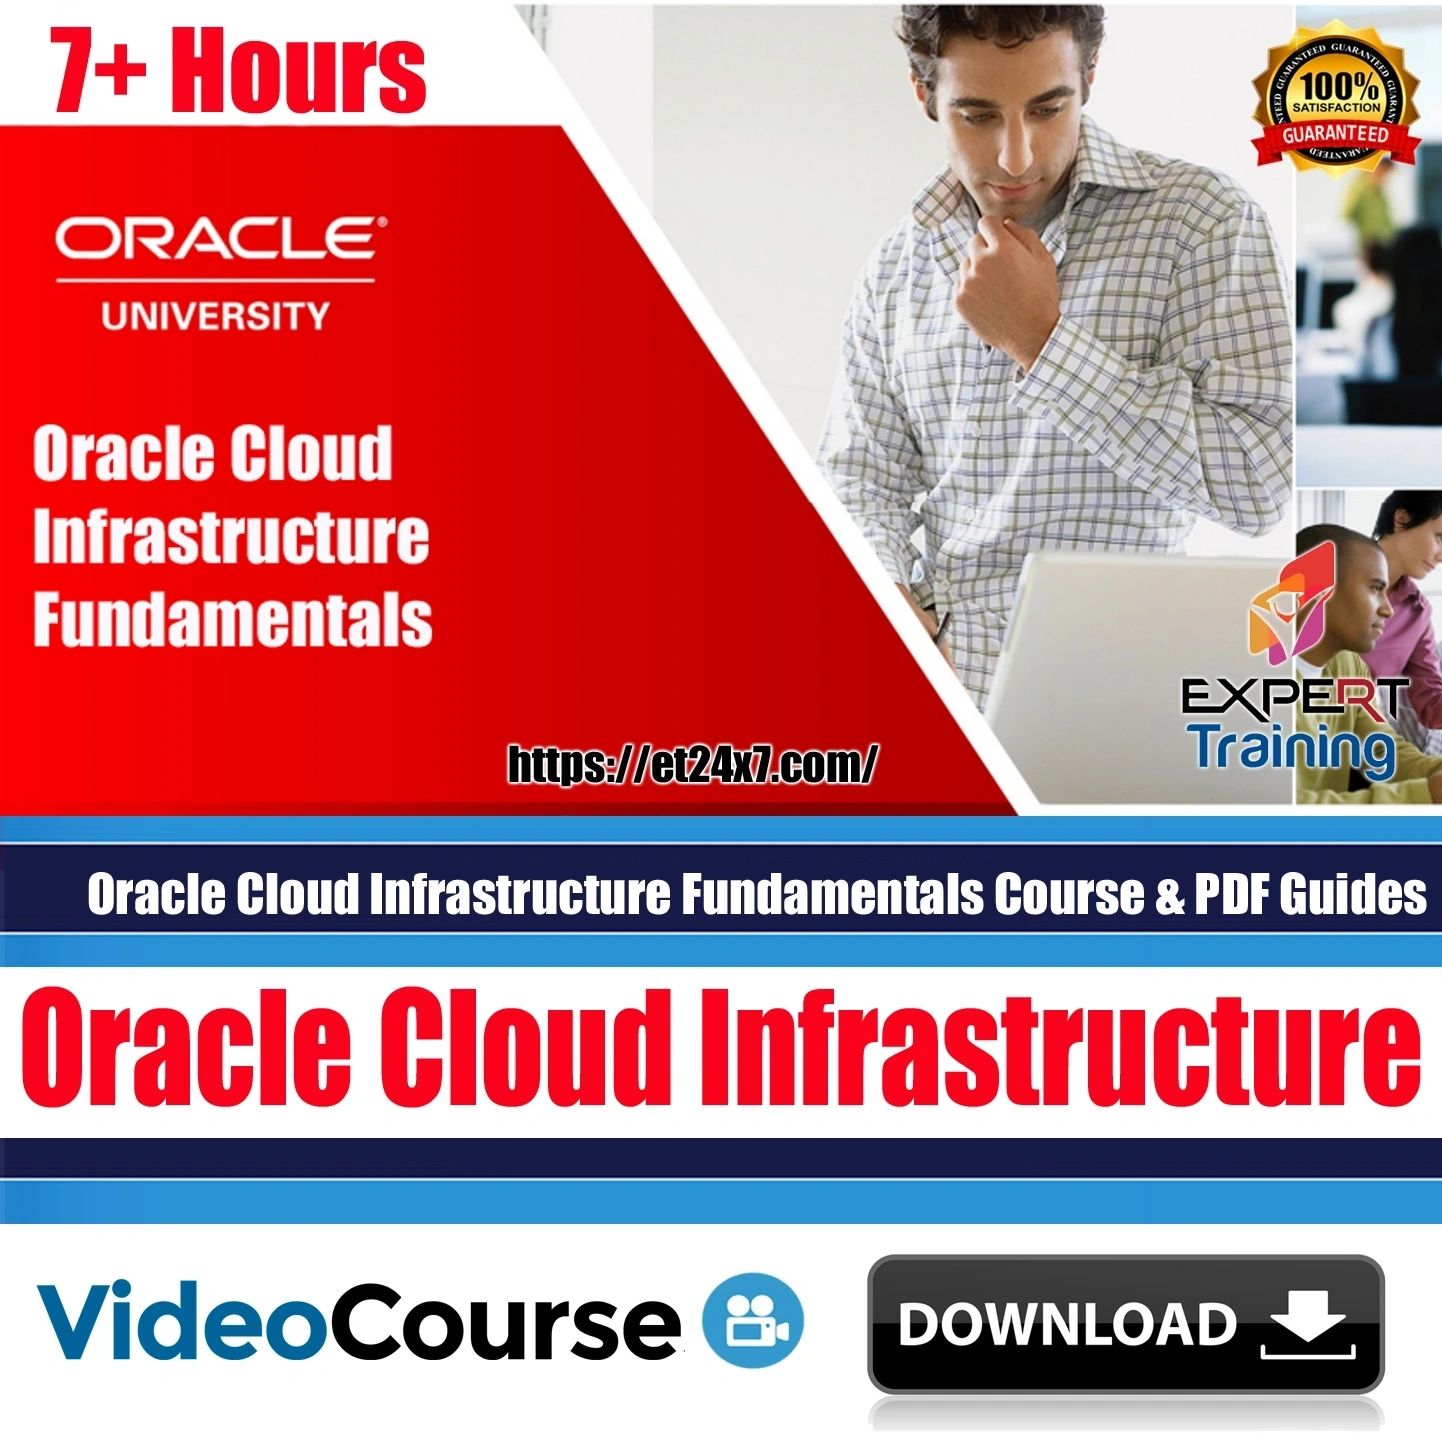 Oracle Cloud Infrastructure Fundamentals Course & PDF Guides